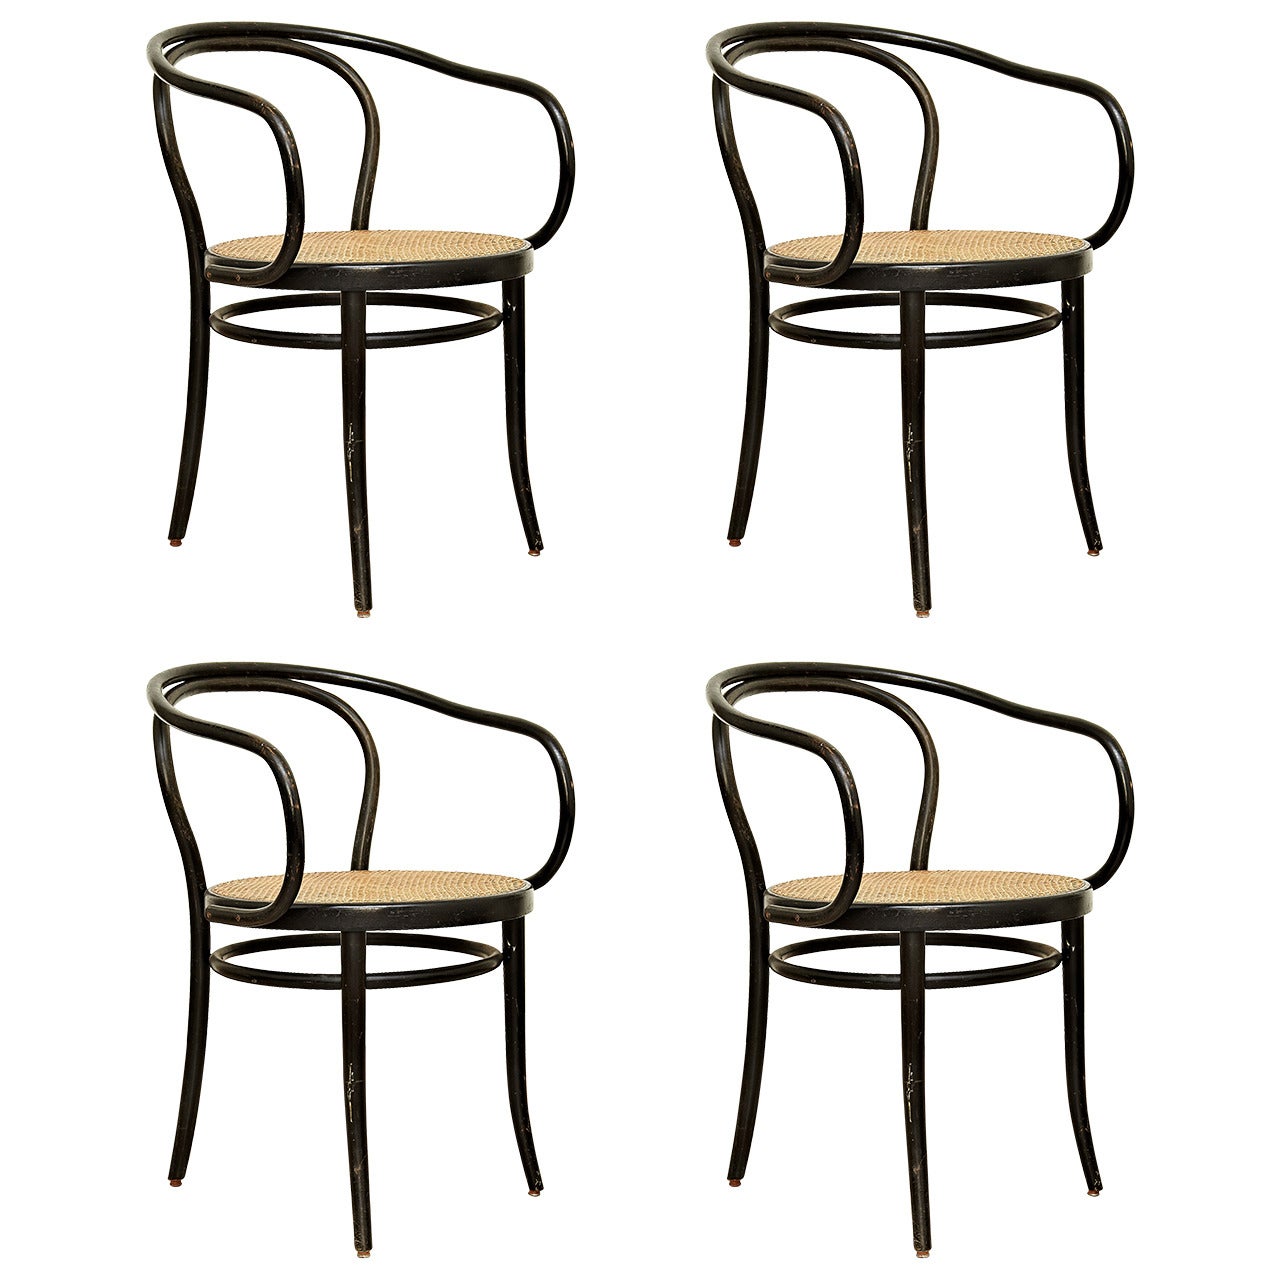 Set of Four Thonet 209 Chairs by Auguste Thonet for Thonet